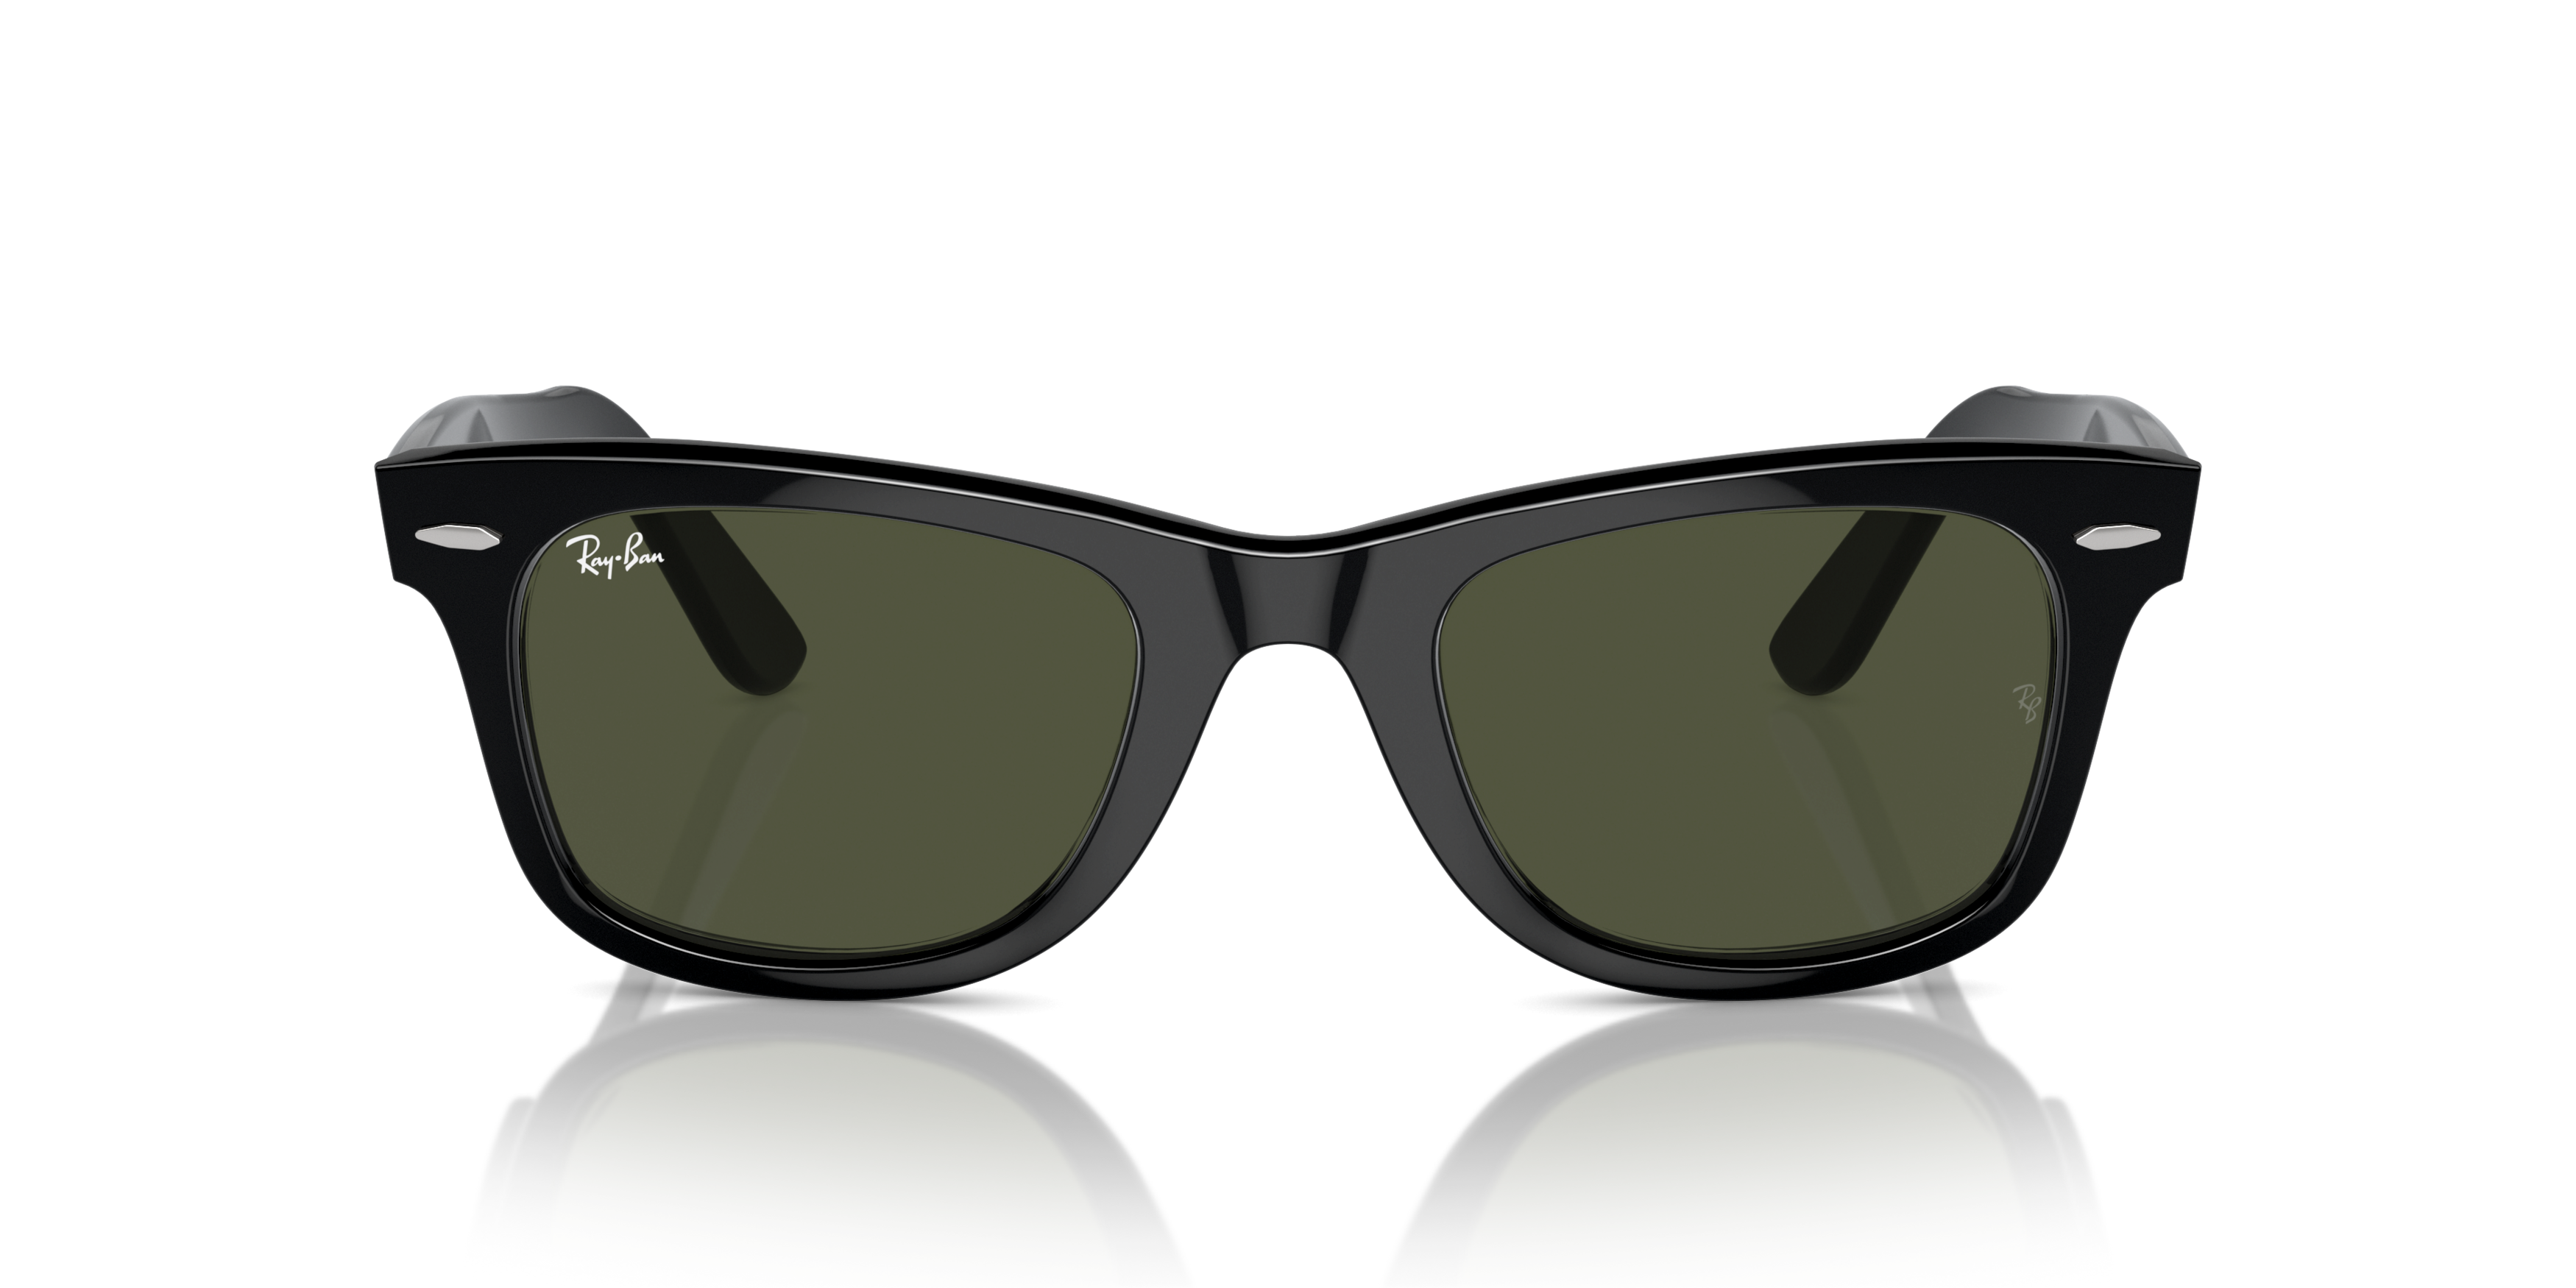 [products.image.front] Ray-Ban Original Wayfarer Classic RB2140 901